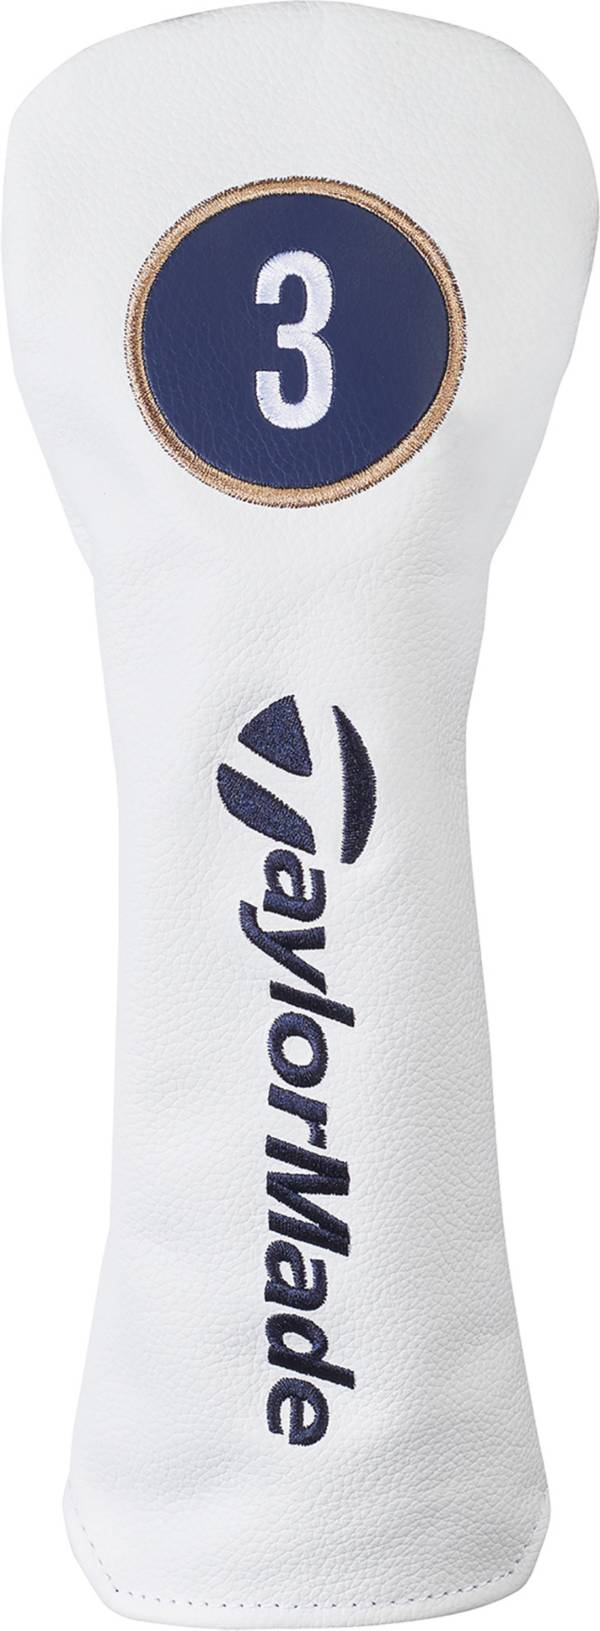 TaylorMade 2022 PGA Championship Fairway Wood Headcover product image